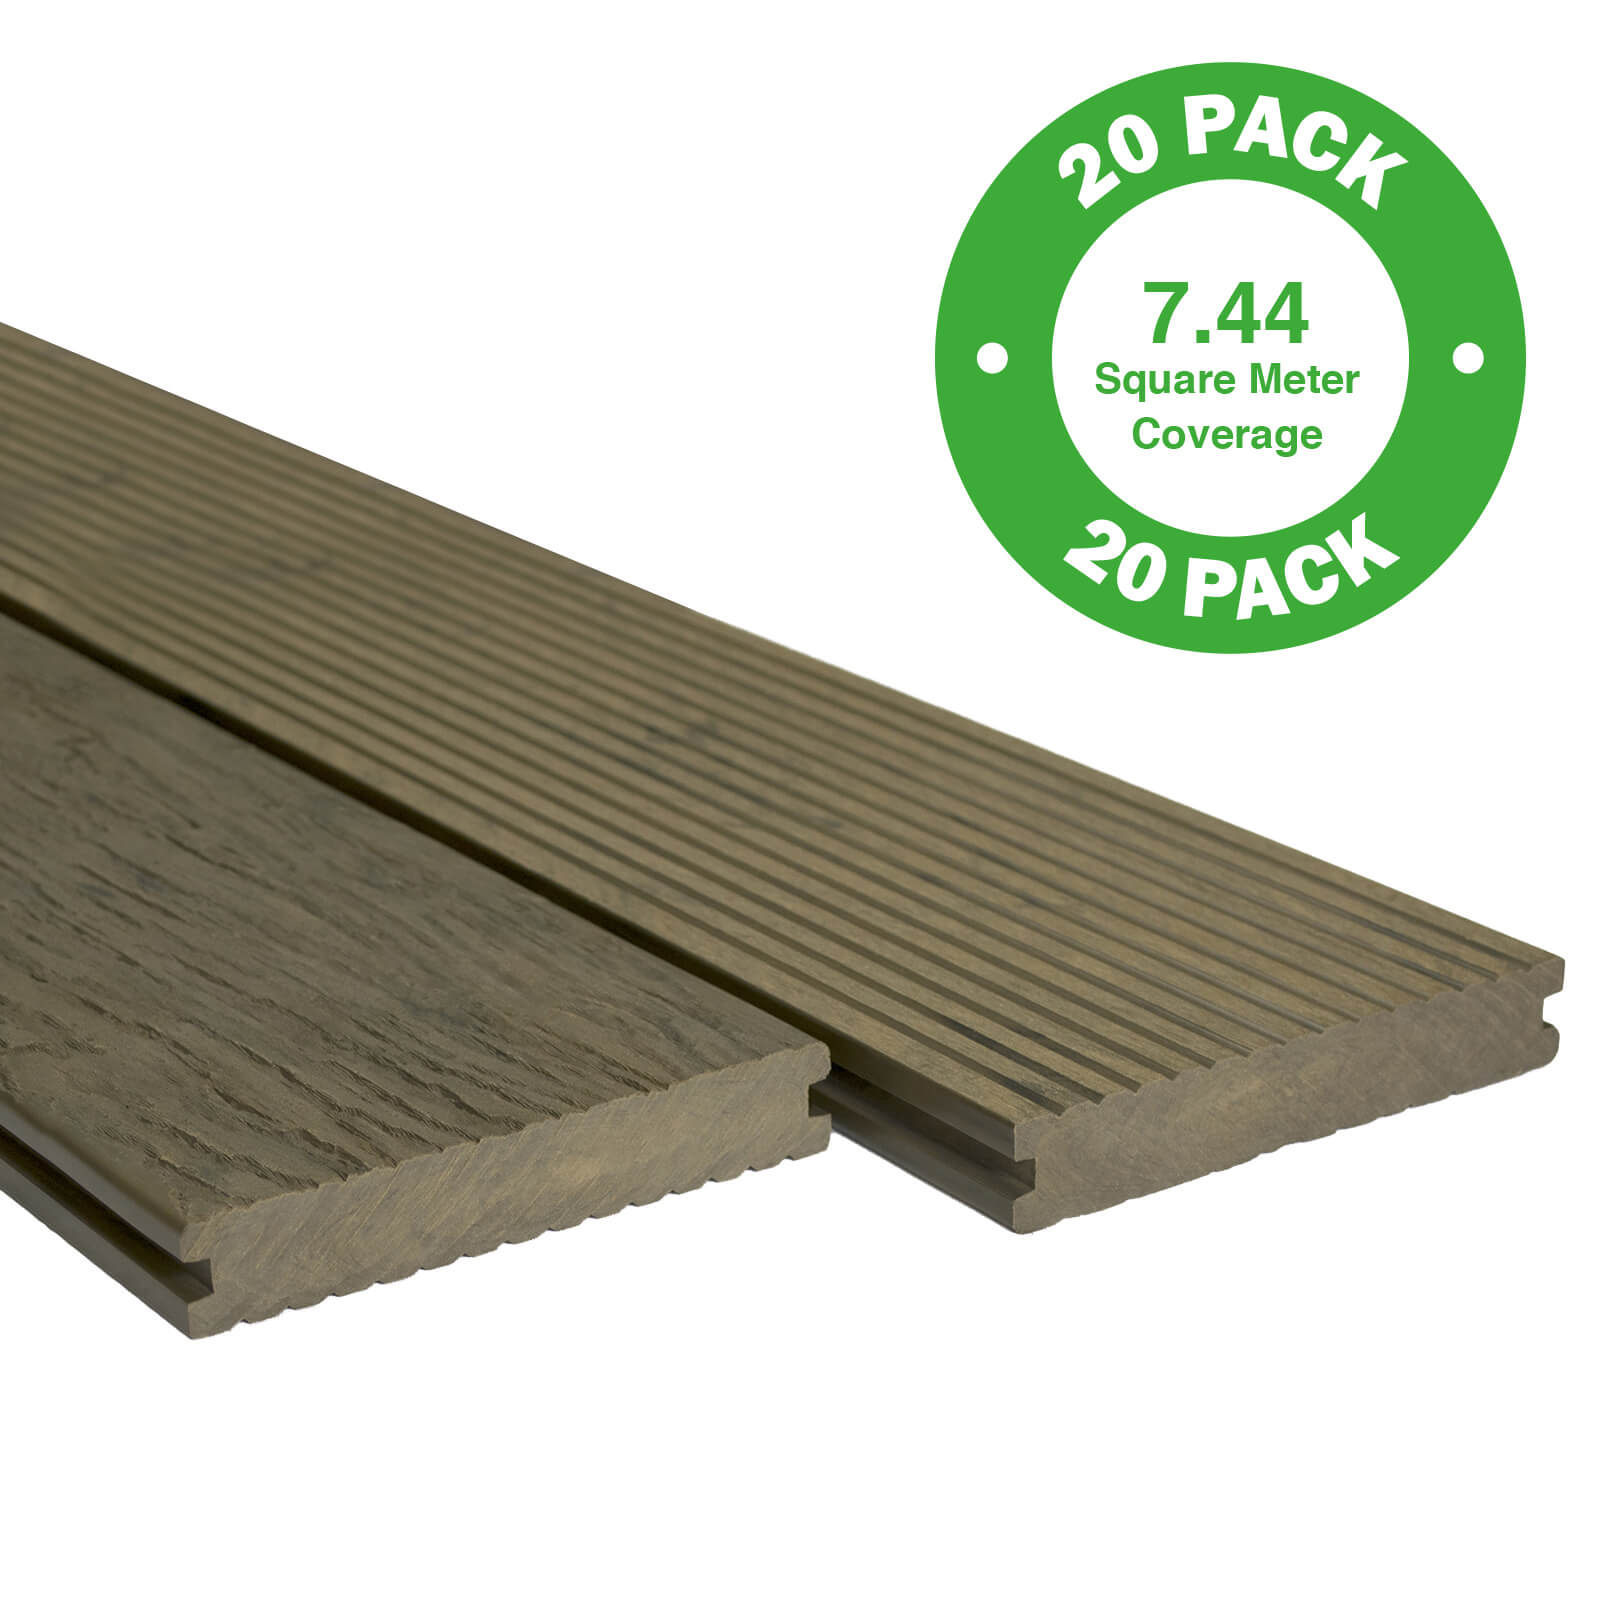 Photo of Heritage Composite Decking 20 Pack Oak - 7.44 M2